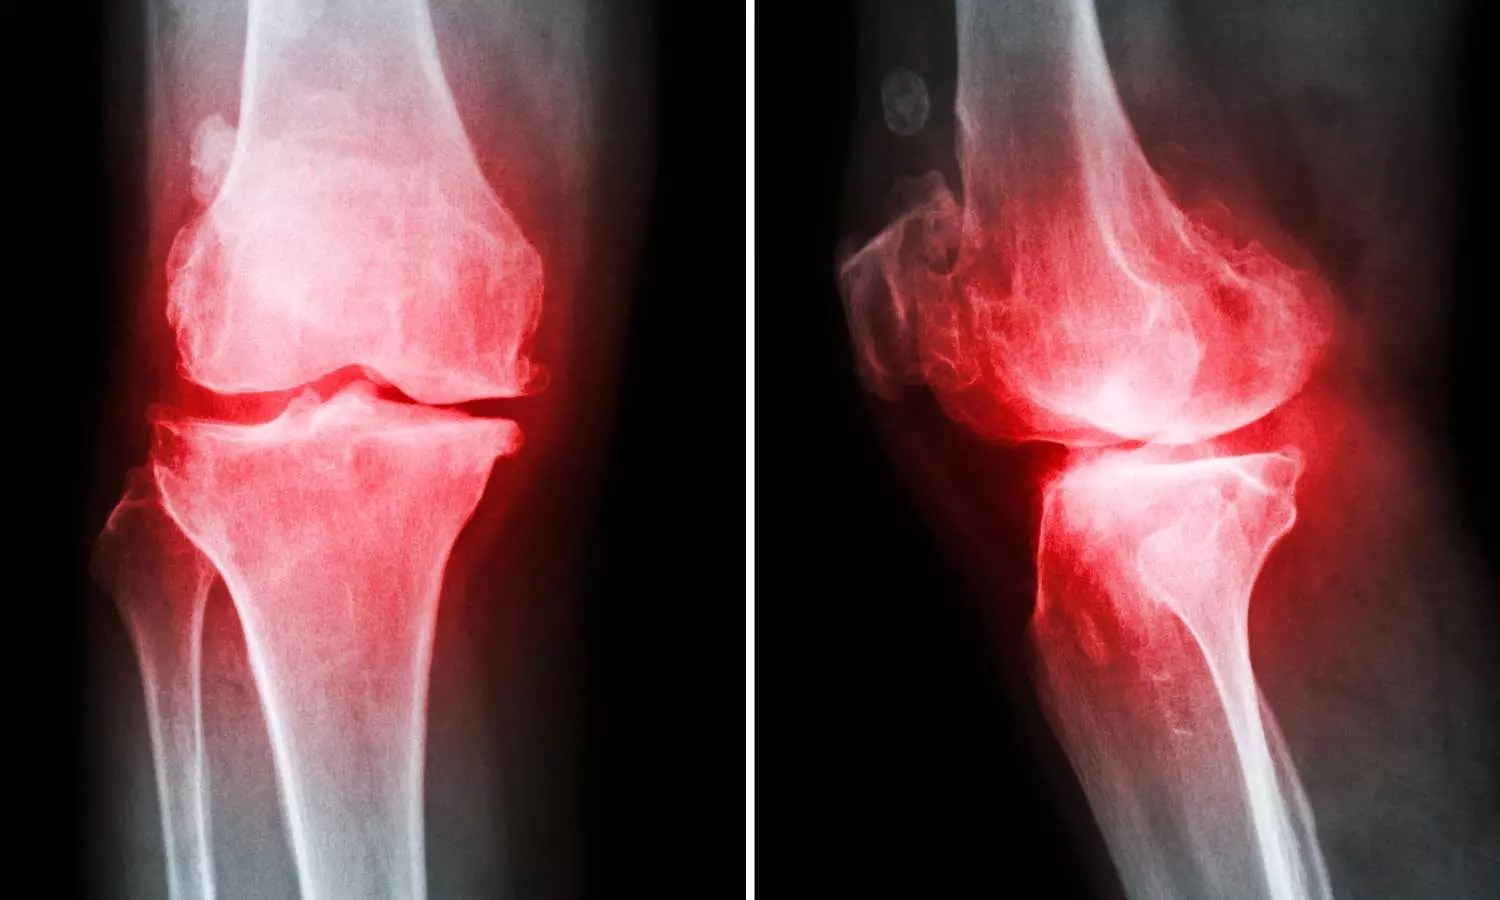 Artificial Intelligence searches an early sign of osteoarthritis from an x-ray image